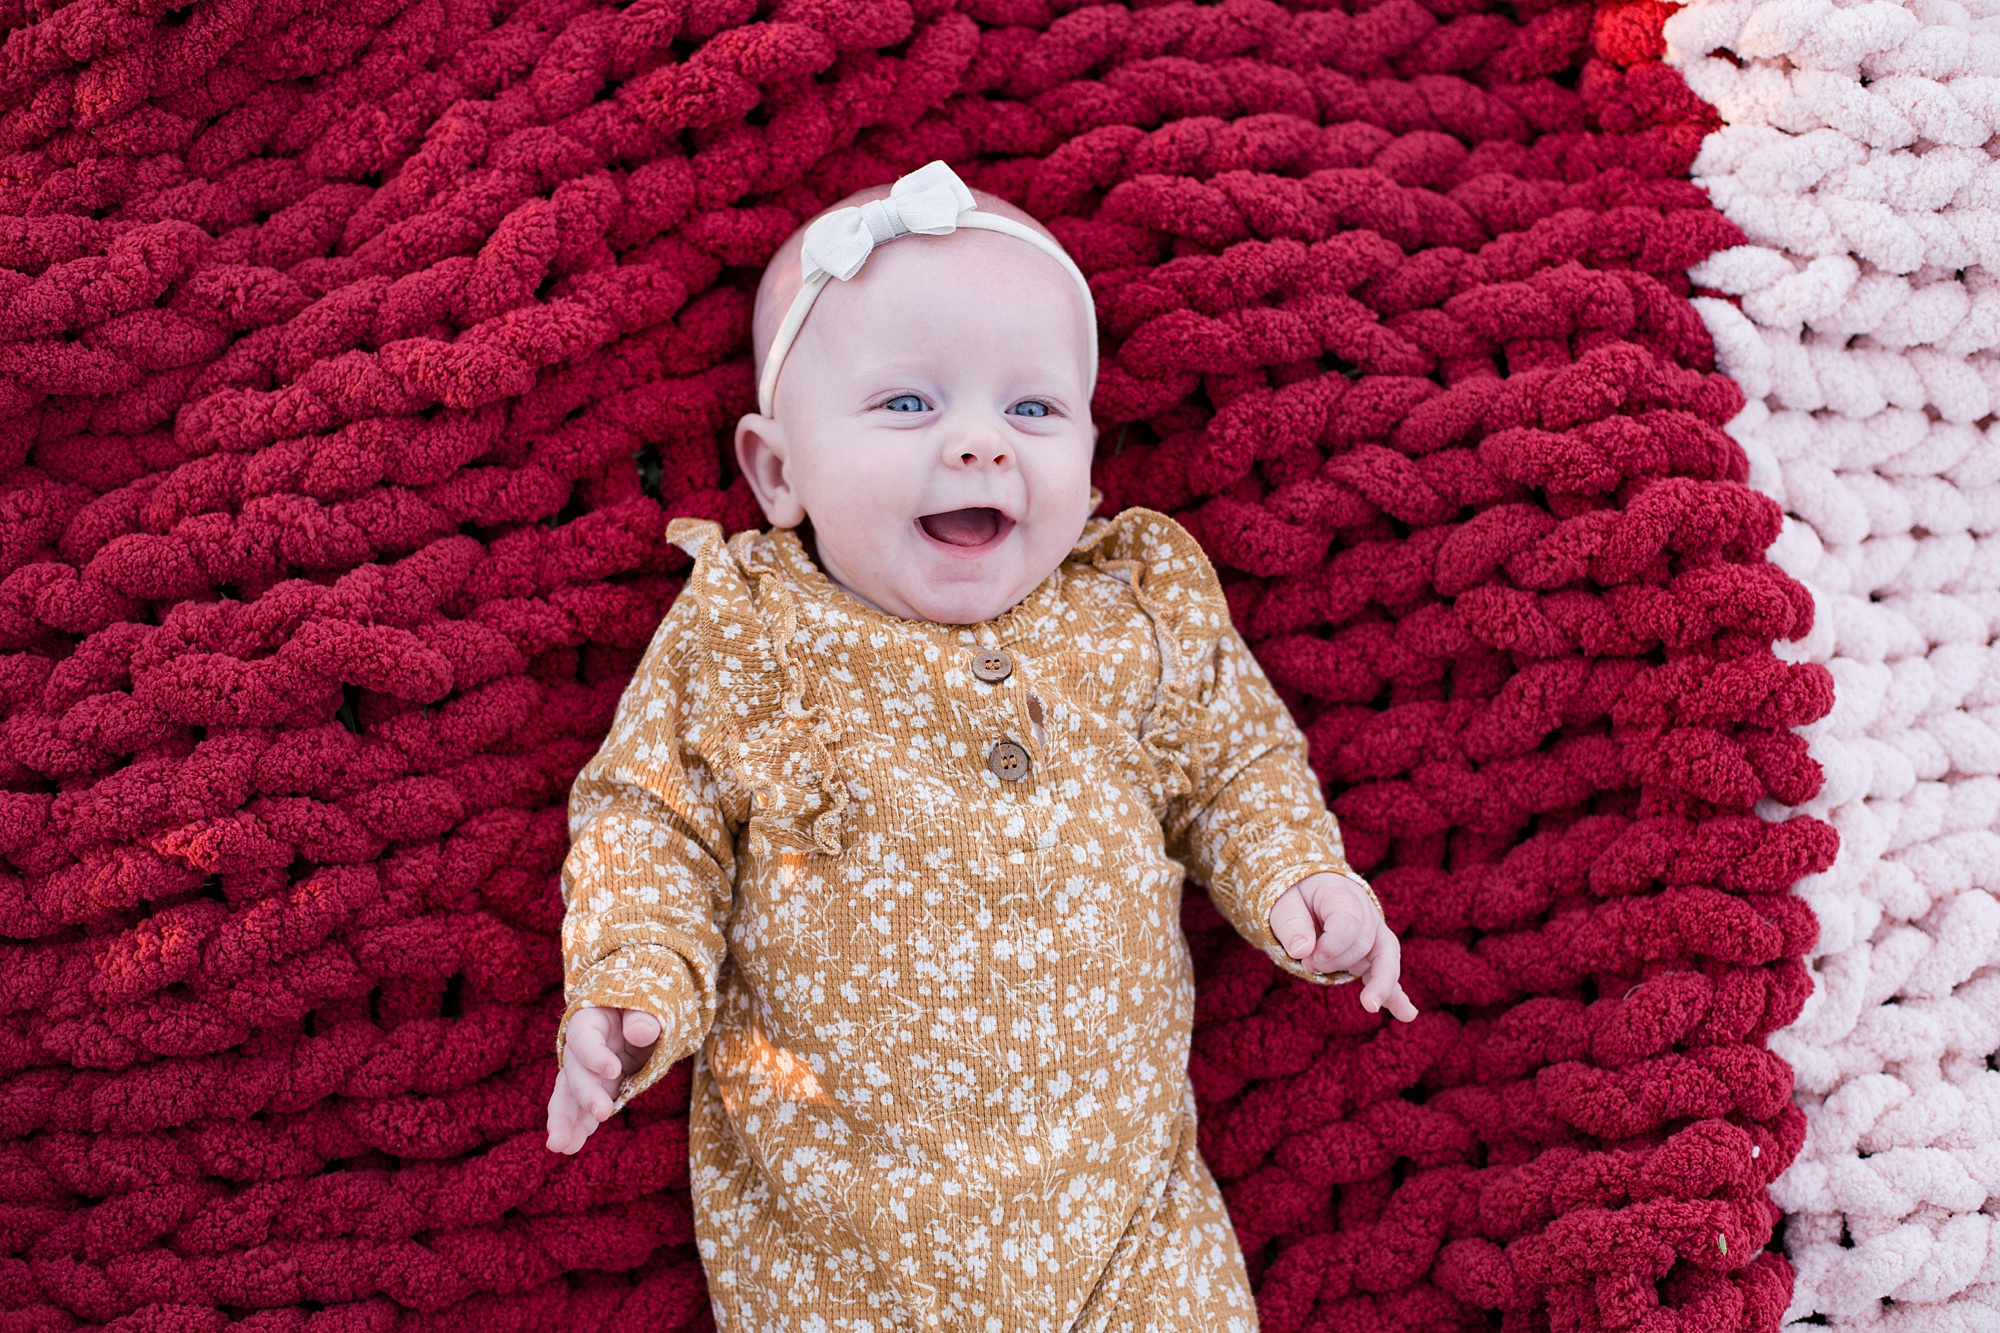 baby in yellow outfit lays on red knit blanket